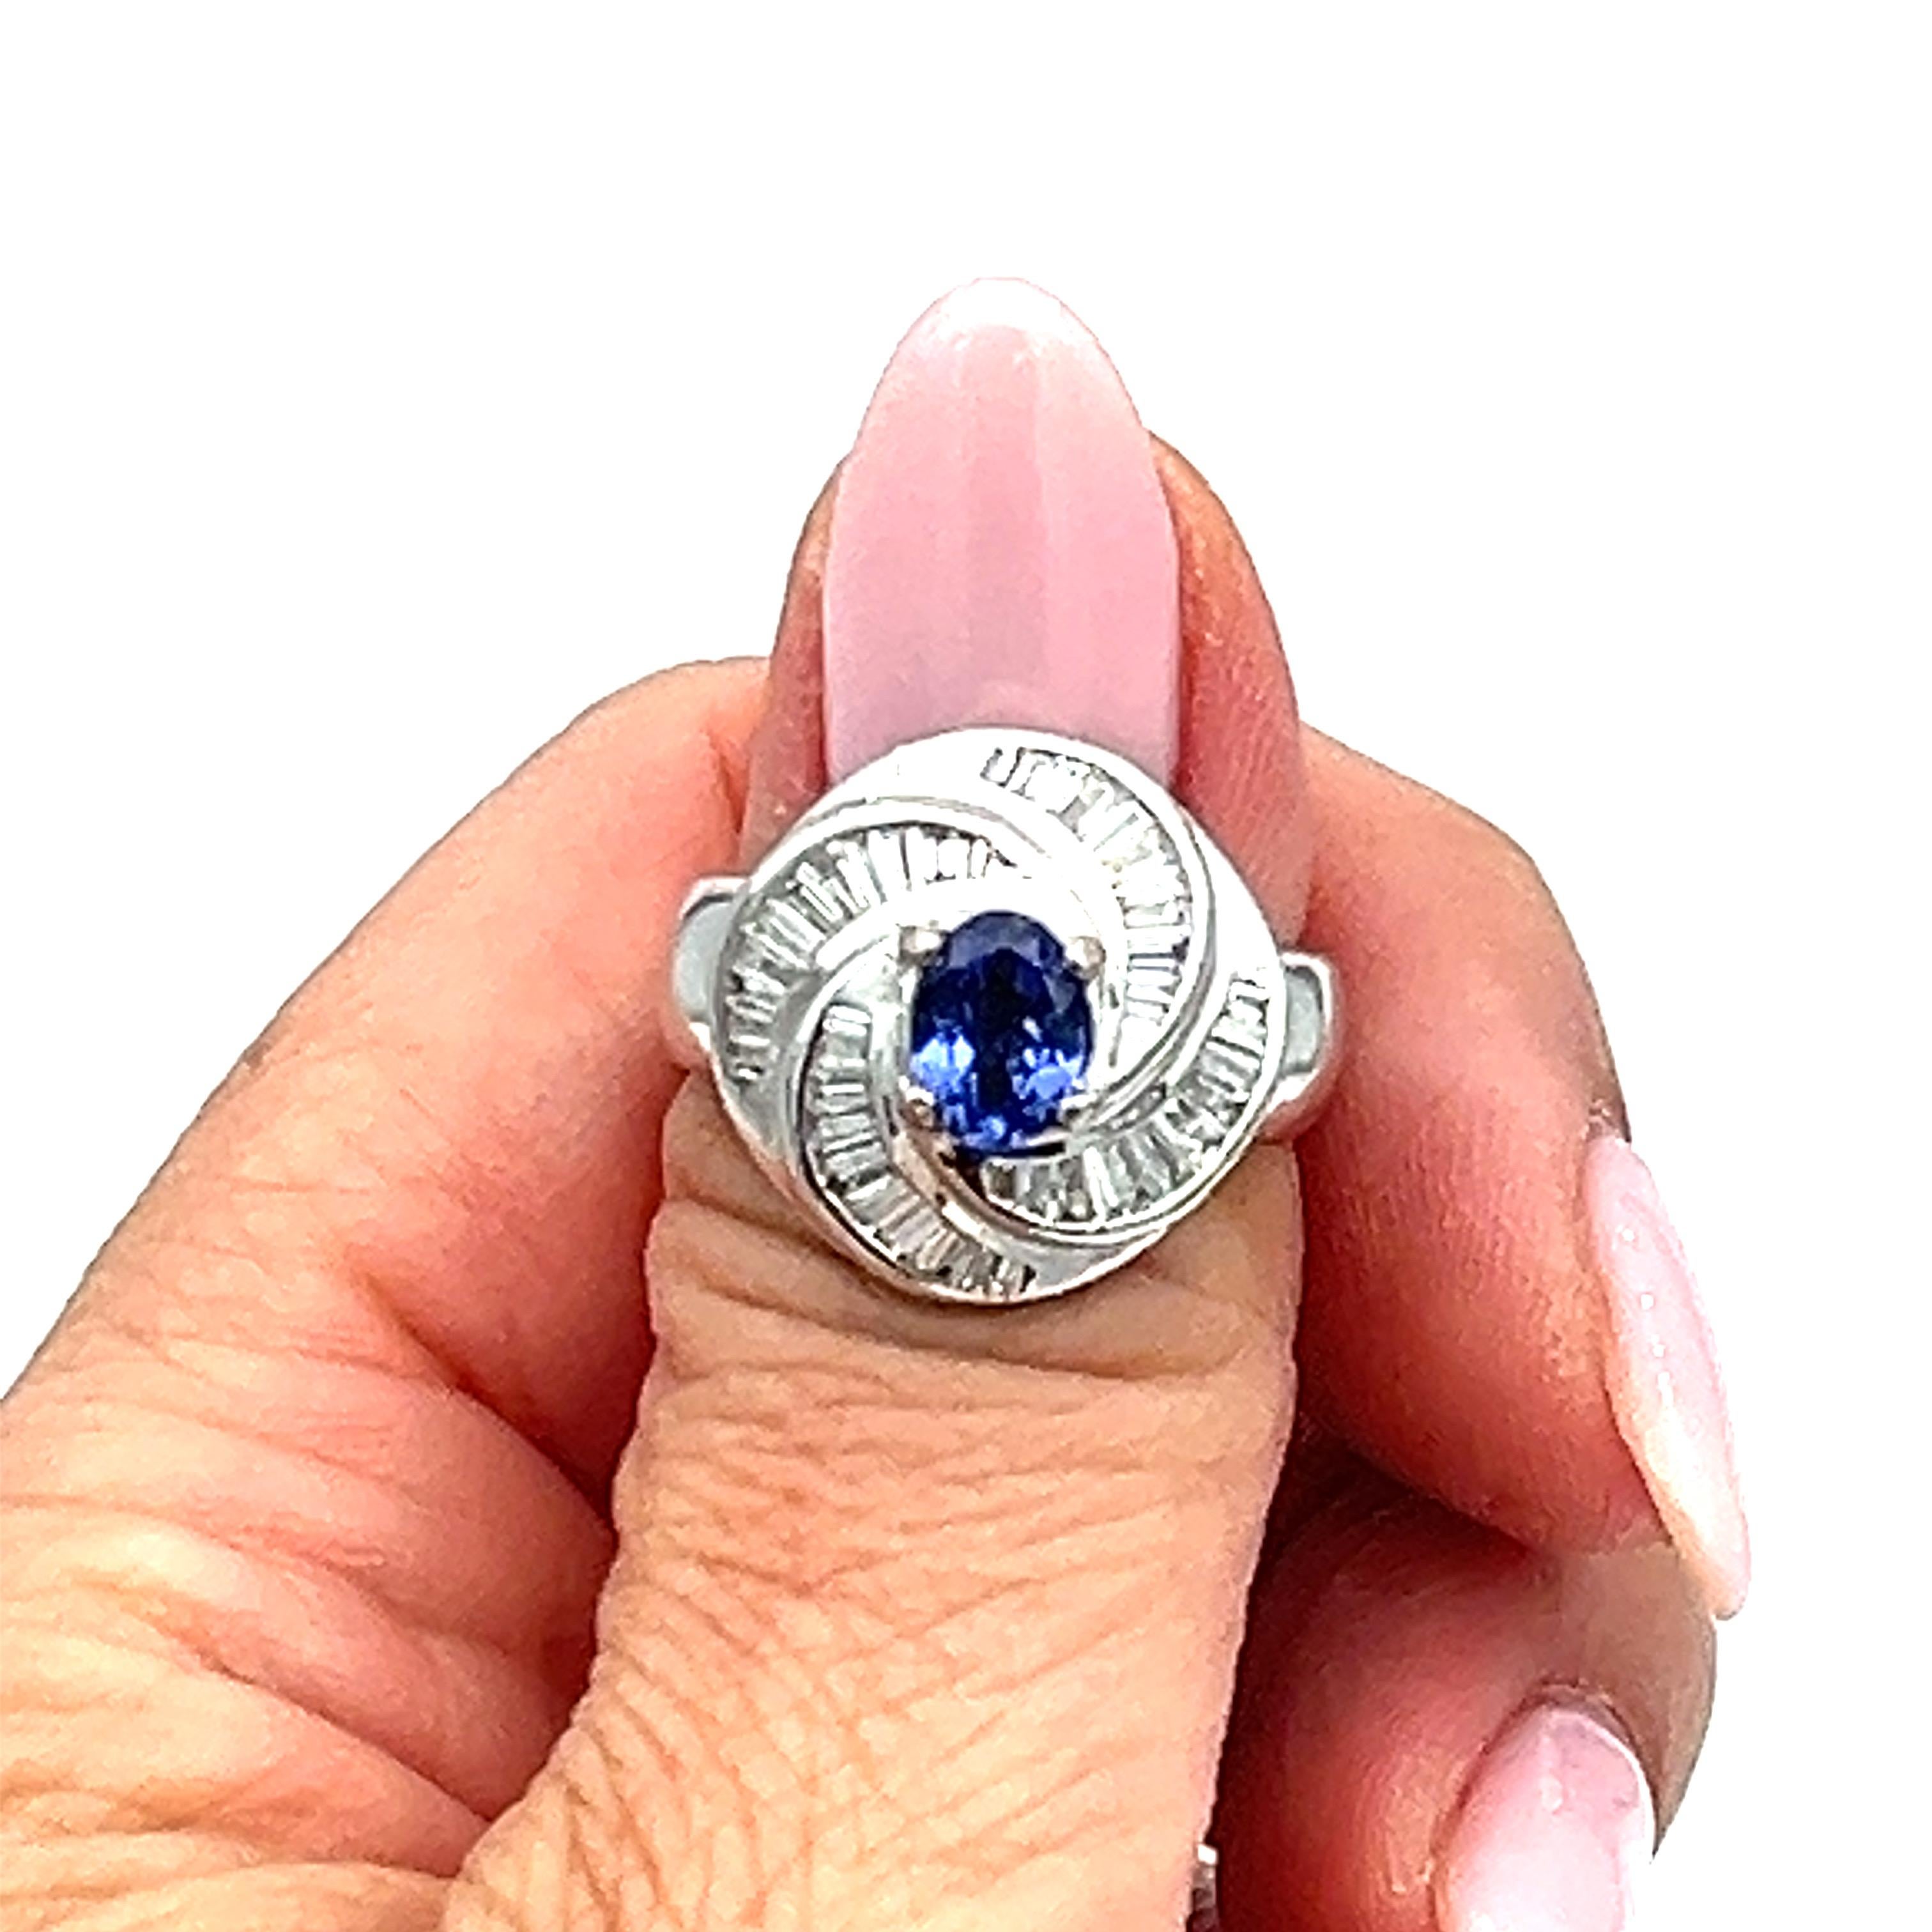 This stunning ring features a gorgeous oval-shaped tanzanite stone in a rich blue color, weighing 1.56 carats, accompanied by sparkling diamonds in a white gold setting. The ring is made of 18k gold, and has a vintage-inspired cocktail style.